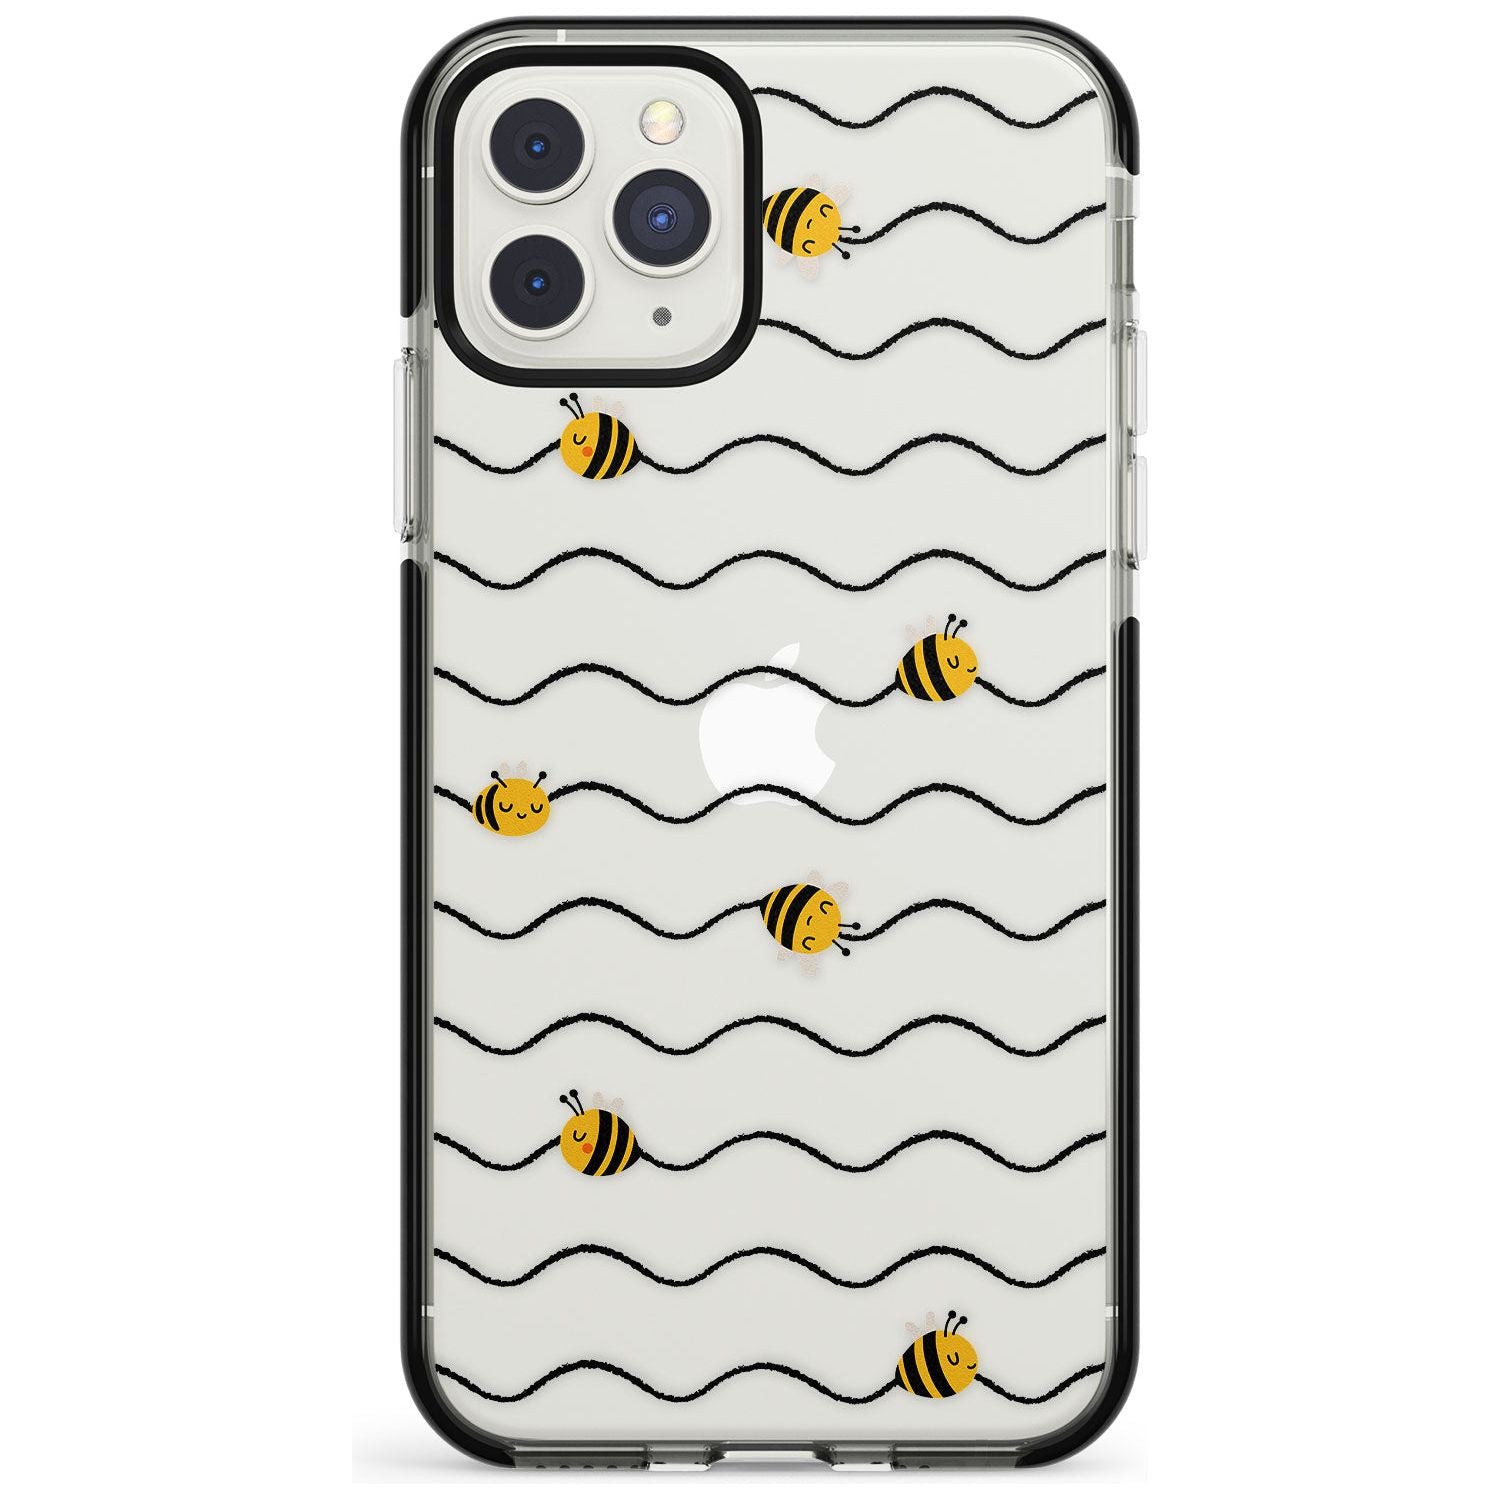 Sweet as Honey Patterns: Bees & Stripes (Clear) Black Impact Phone Case for iPhone 11 Pro Max